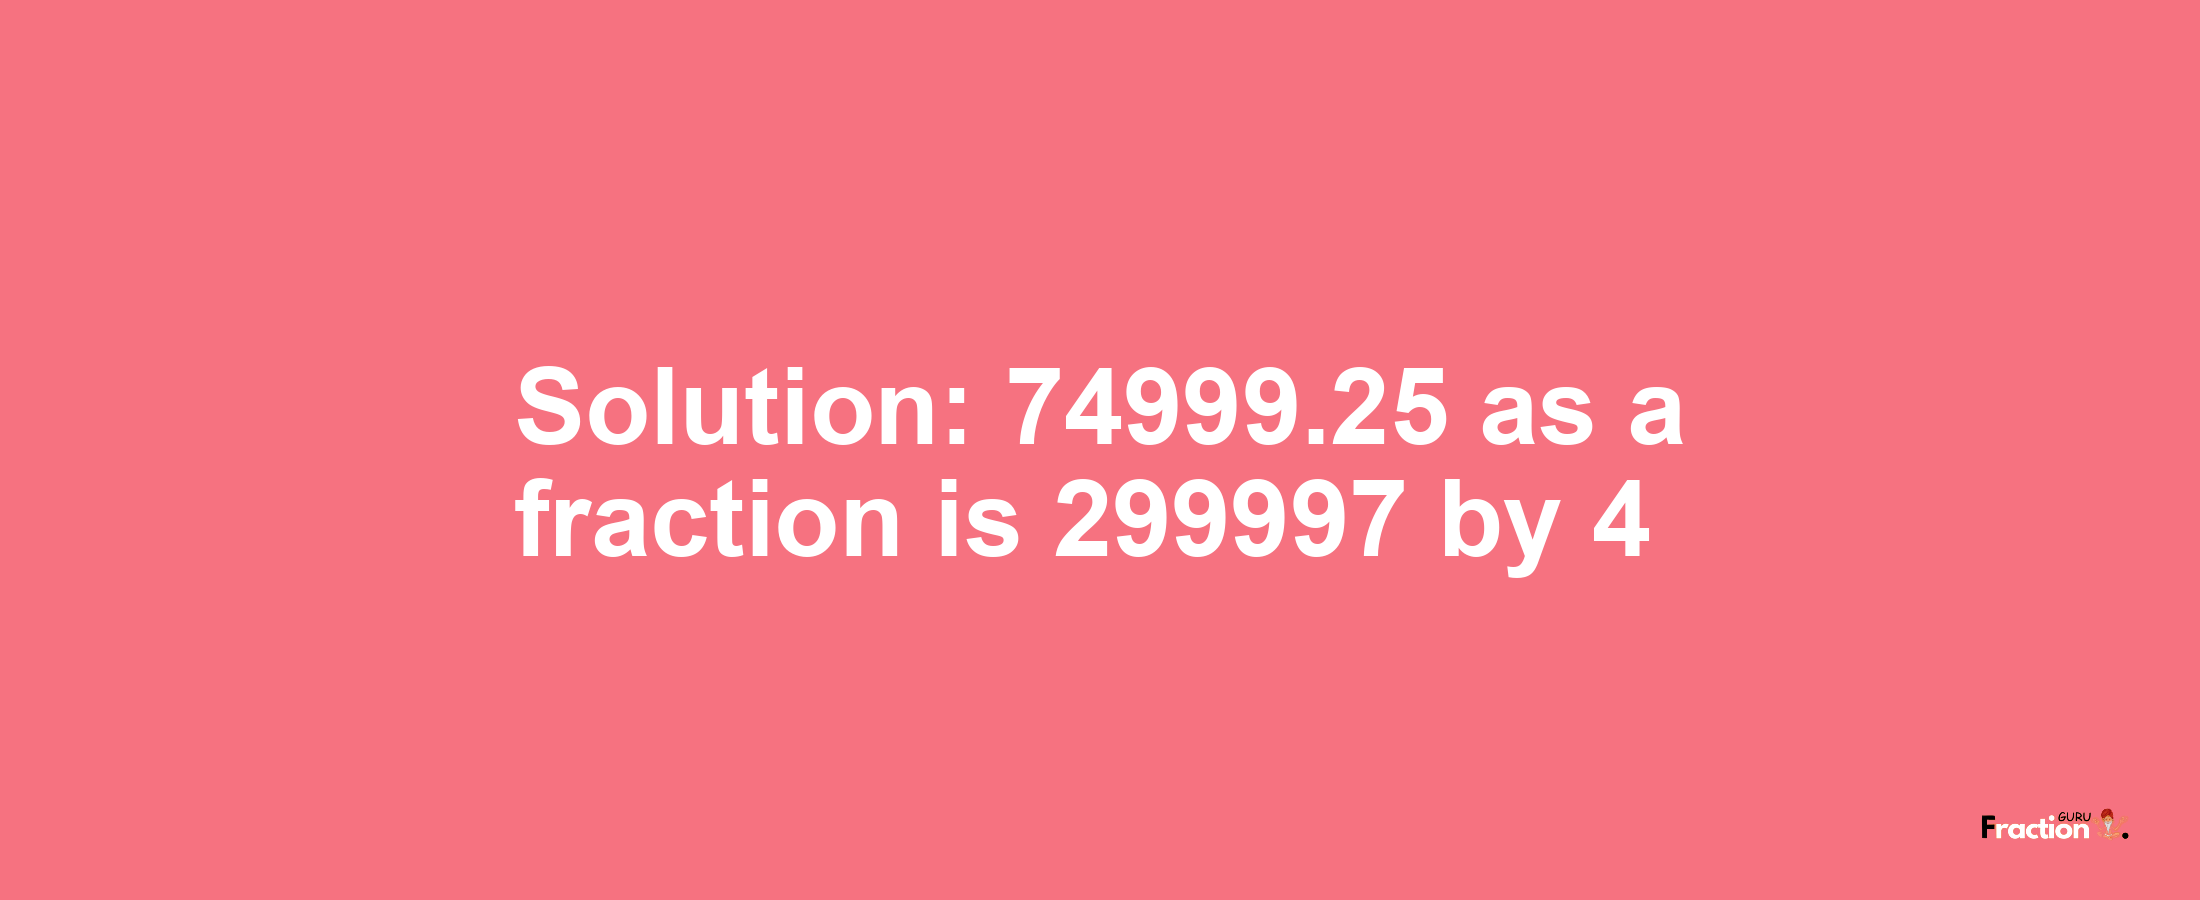 Solution:74999.25 as a fraction is 299997/4